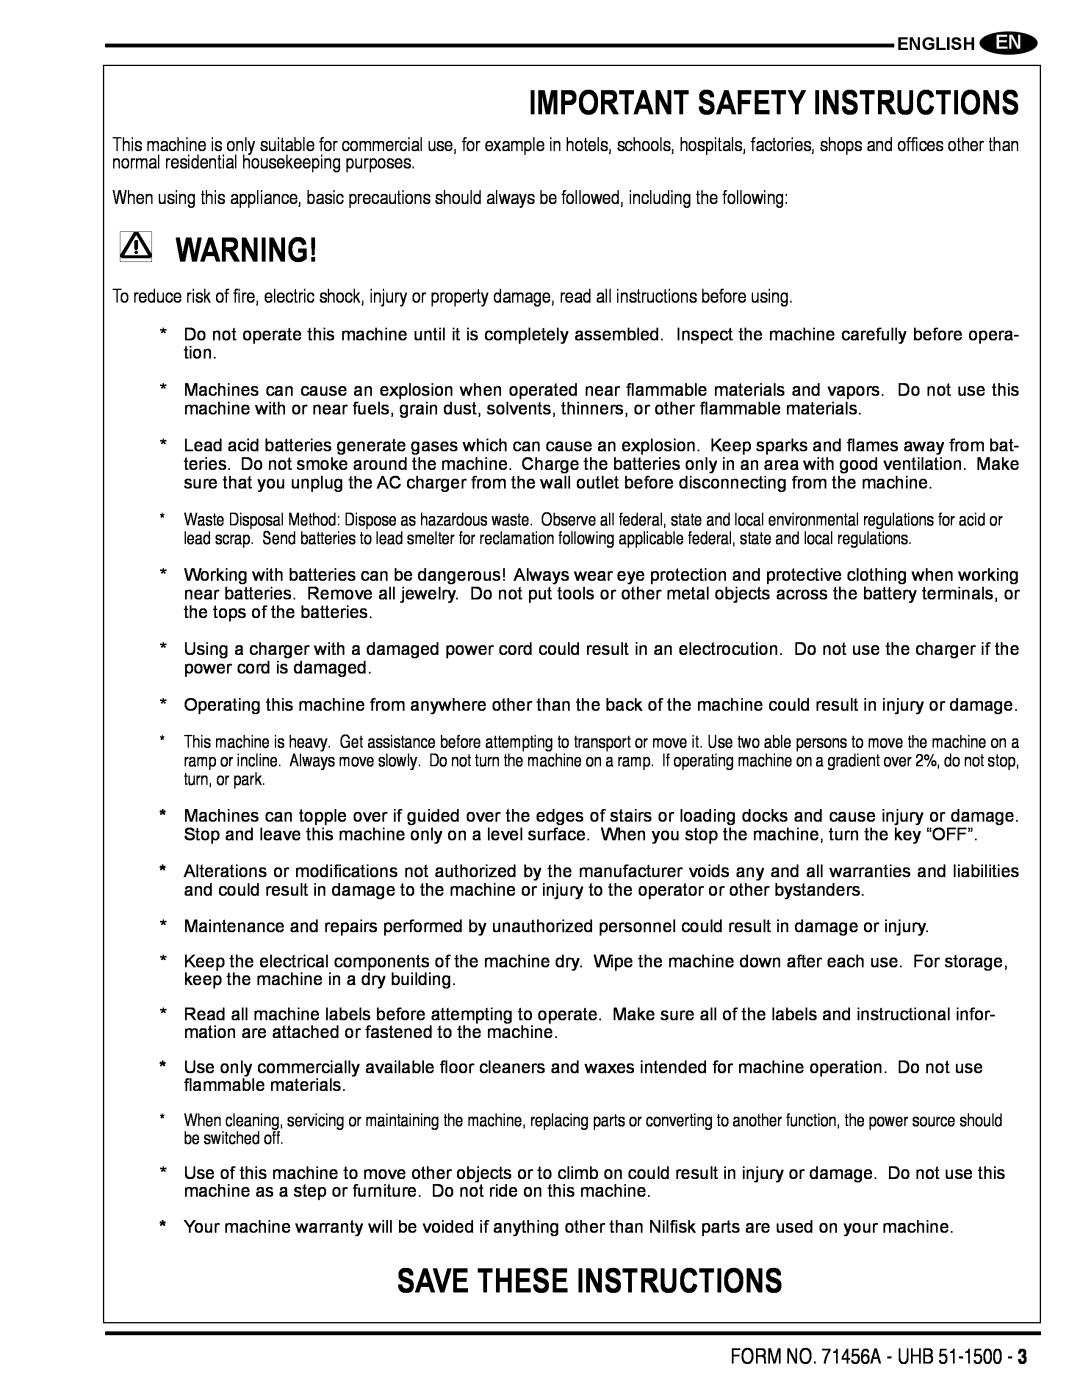 Nilfisk-Advance America 01610A manual Important Safety Instructions, Save These Instructions, FORM NO. 71456A - UHB 